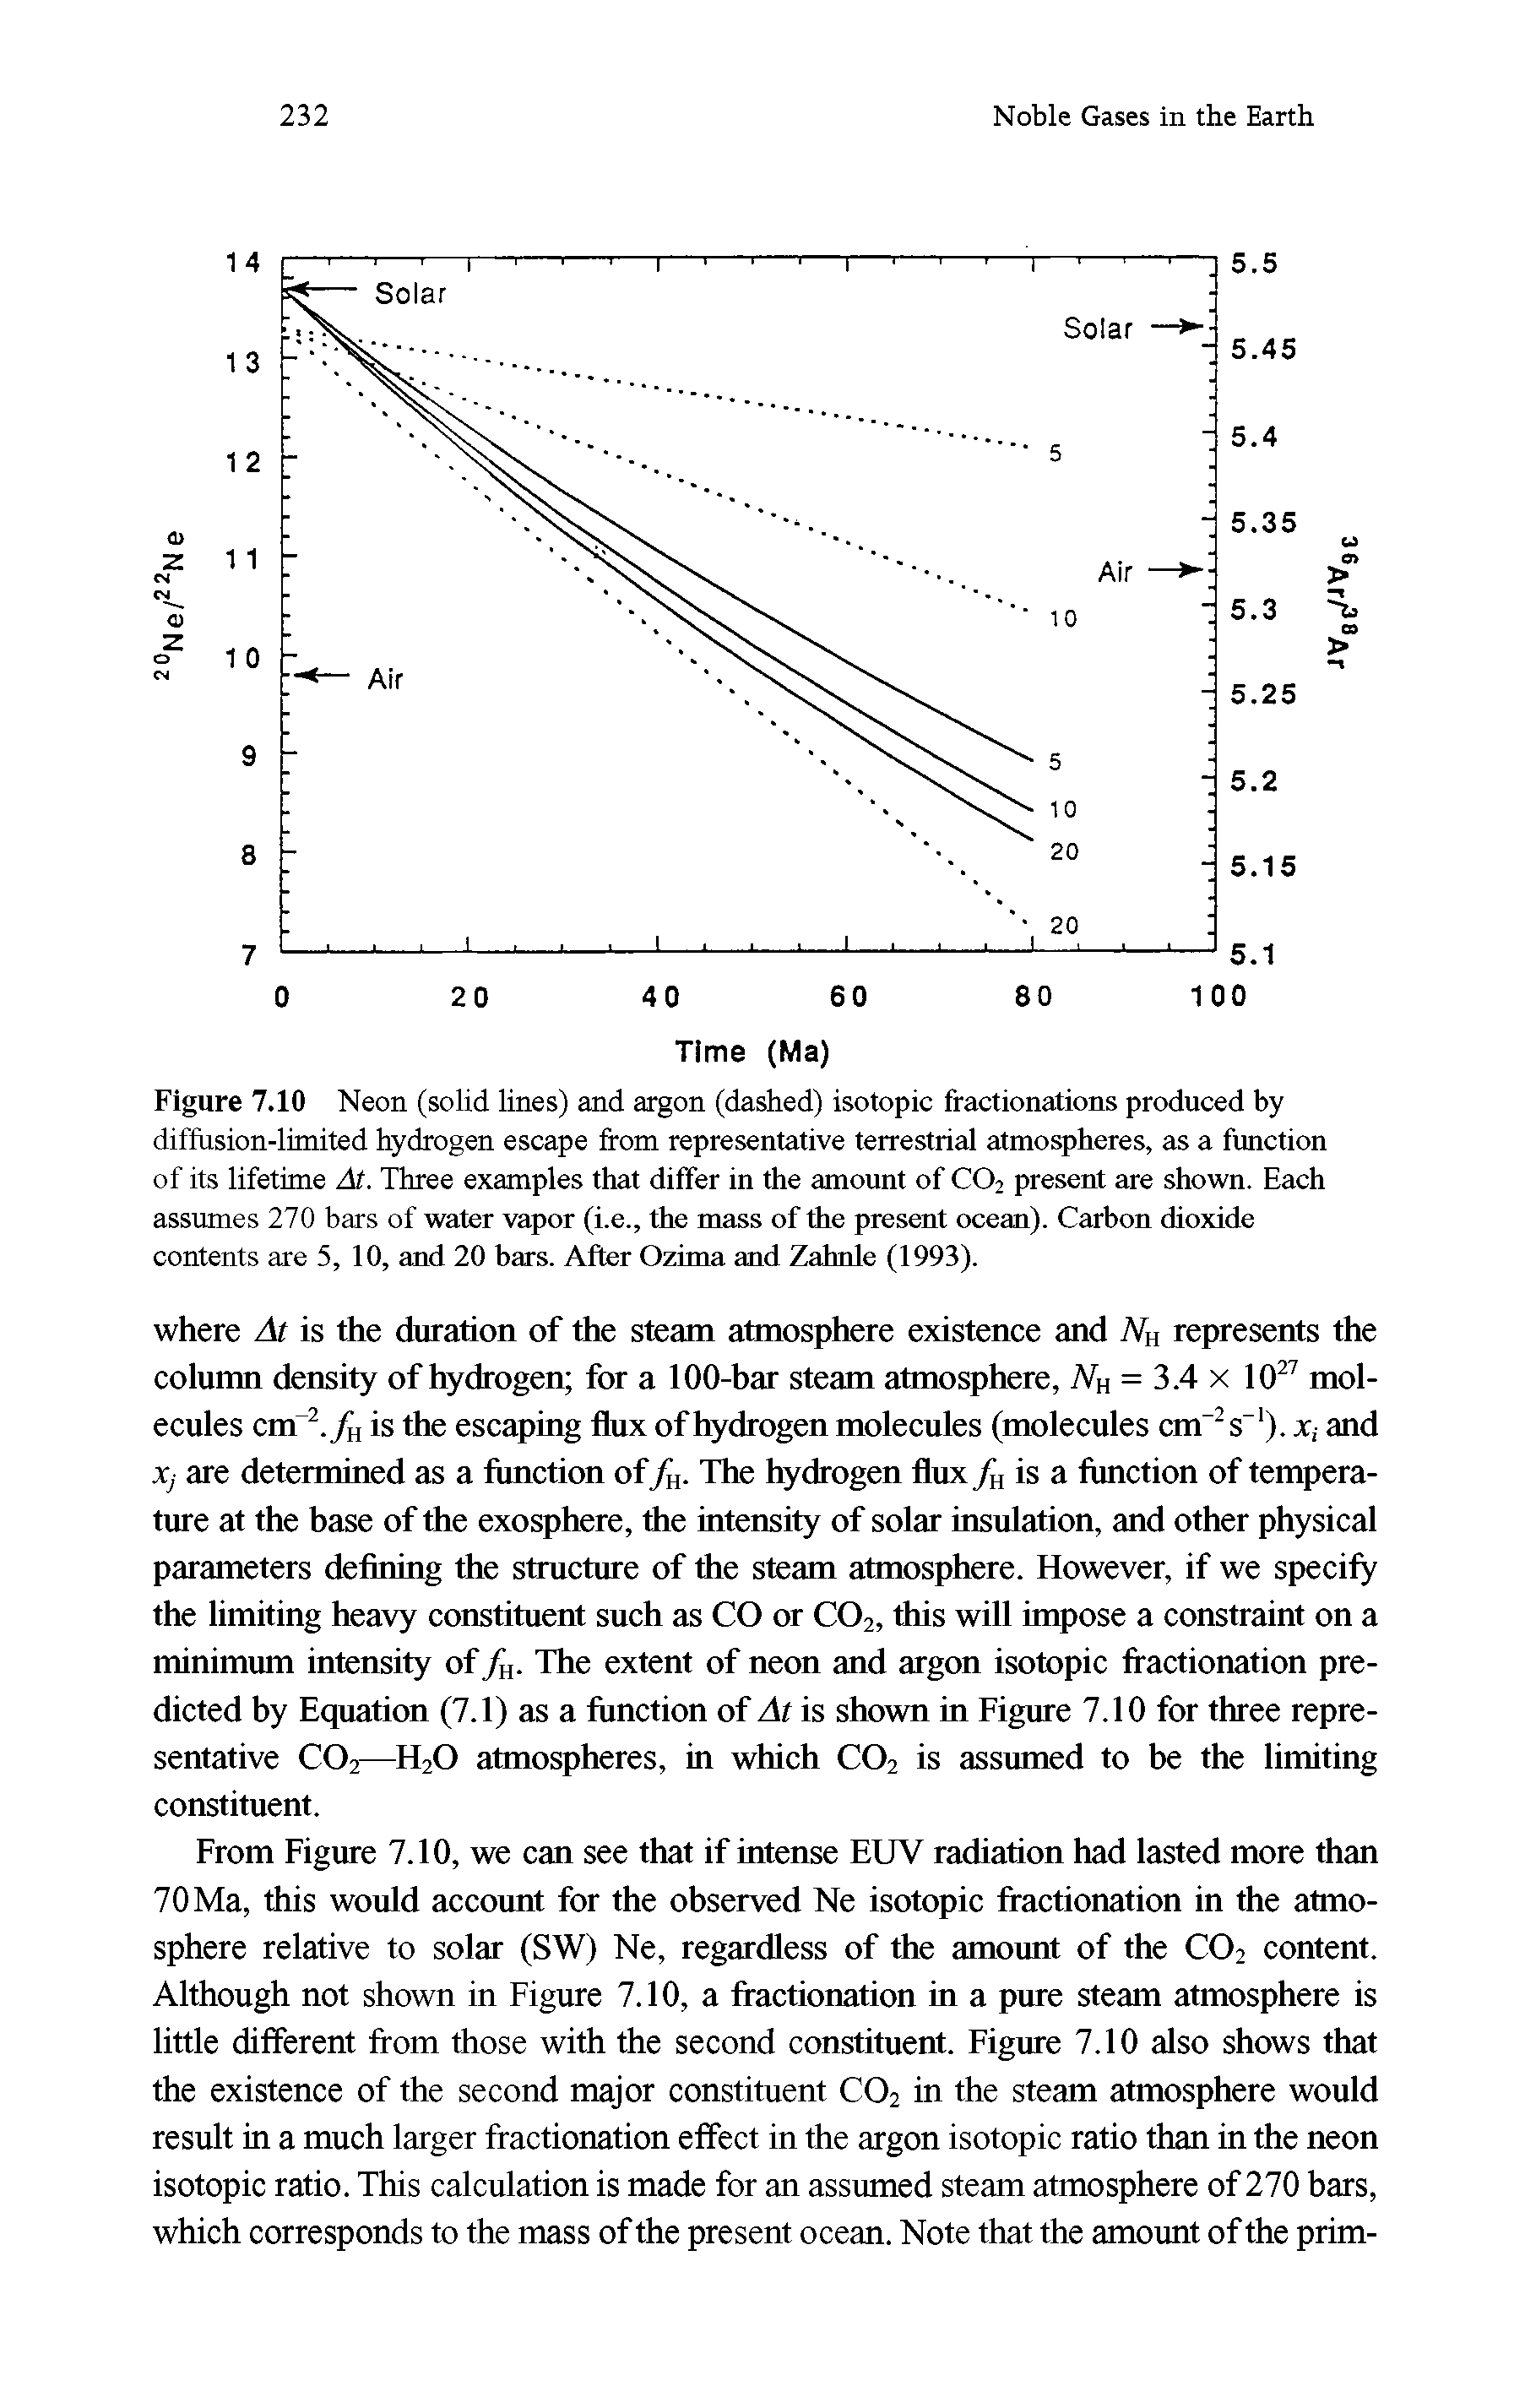 Figure 7.10 Neon (solid lines) and argon (dashed) isotopic fractionations produced by diffusion-limited hydrogen escape from representative terrestrial atmospheres, as a function of its lifetime At. Three examples that differ in the amount of C02 present are shown. Each assumes 270 bars of water vapor (i.e., the mass of the present ocean). Carbon dioxide contents are 5, 10, and 20 bars. After Ozima and Zahnle (1993).